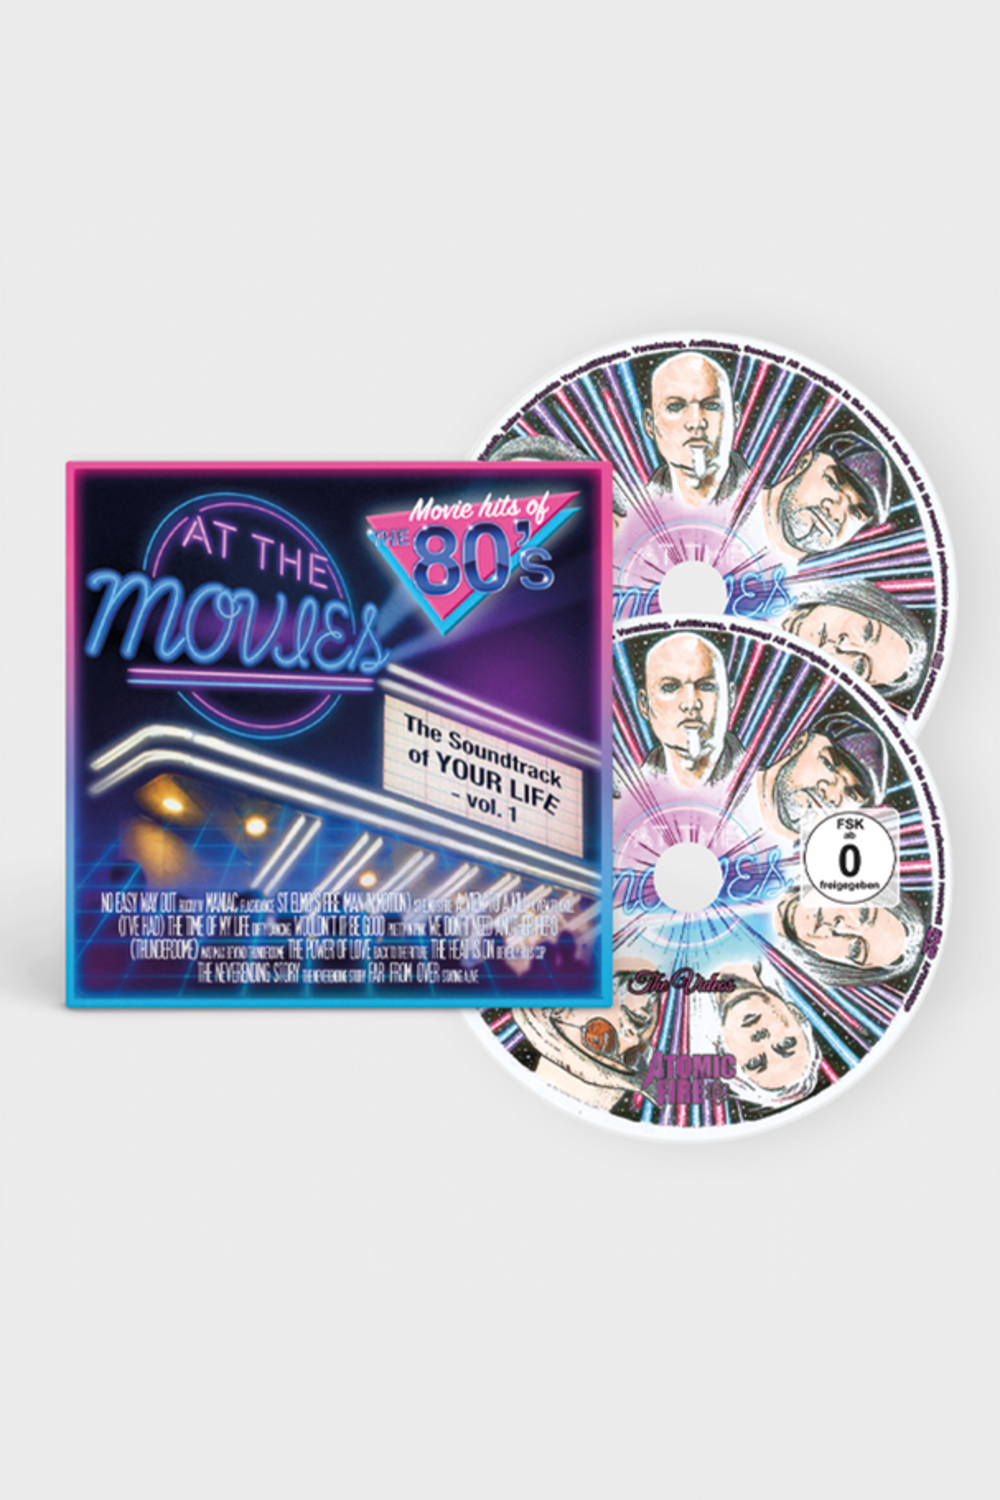 The soundtrack of your life - Vol. 1 DIGIPAK